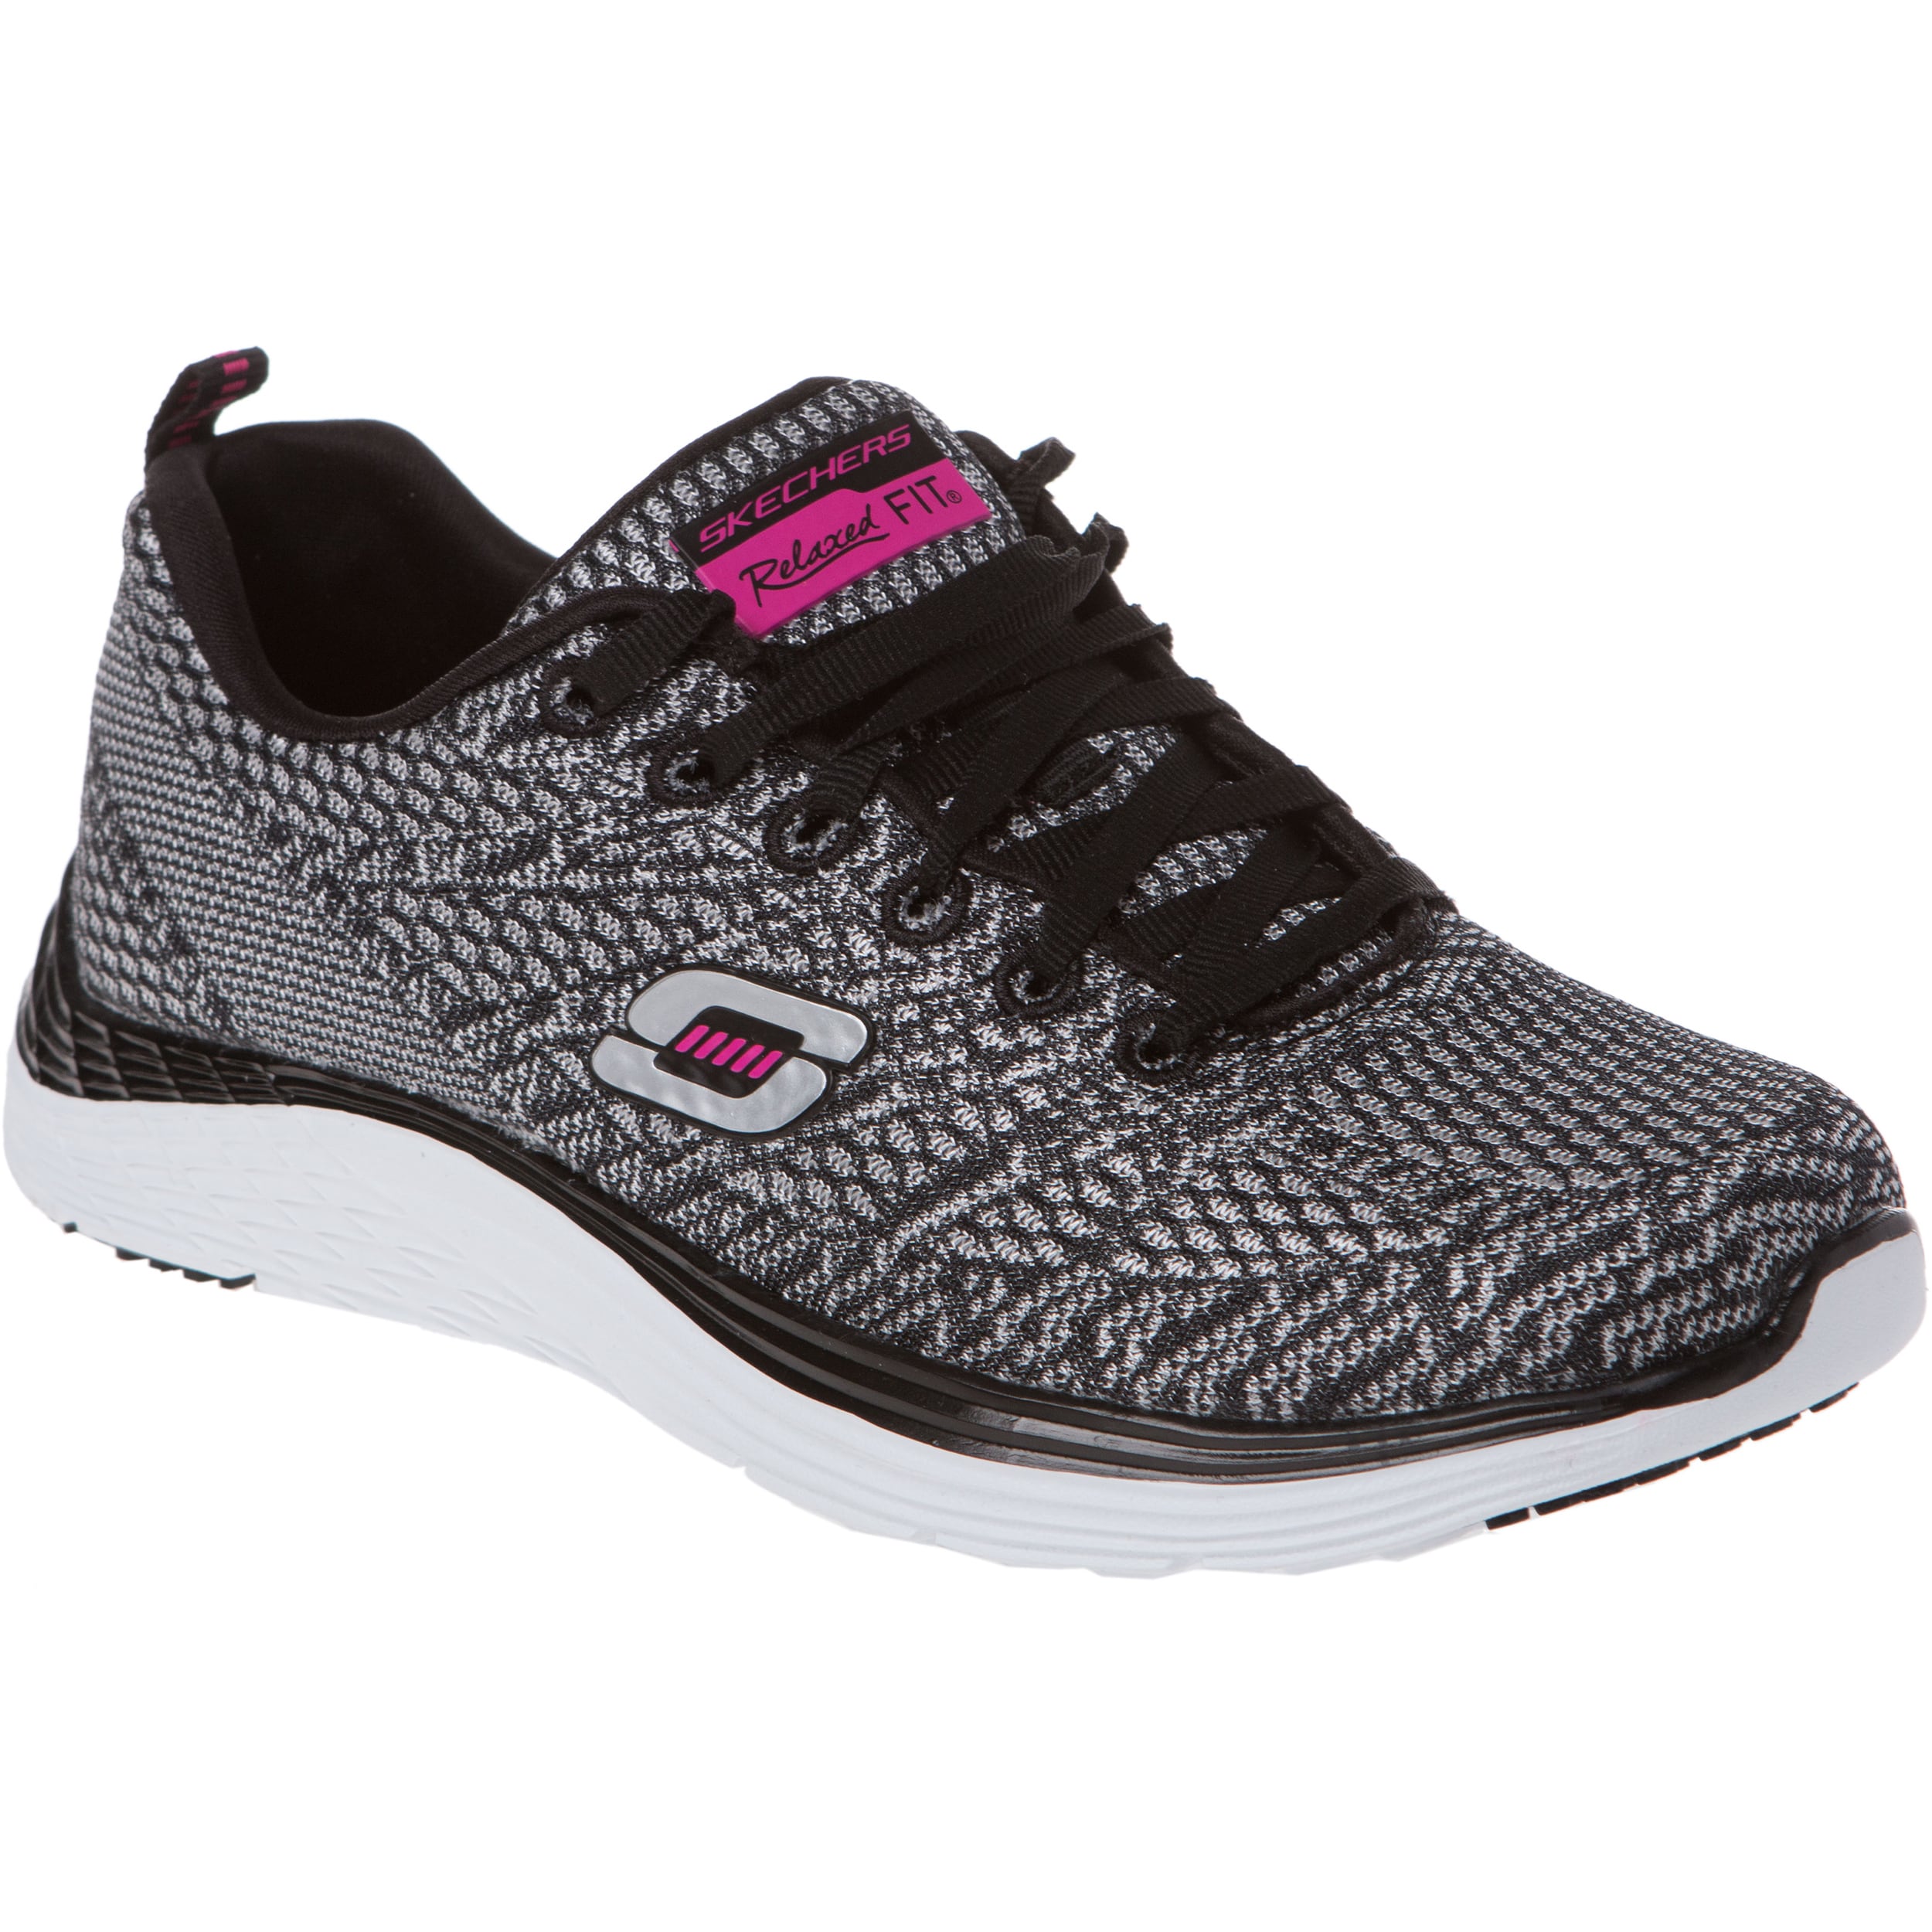 Shop Skechers USA Sport Relaxed Fit 